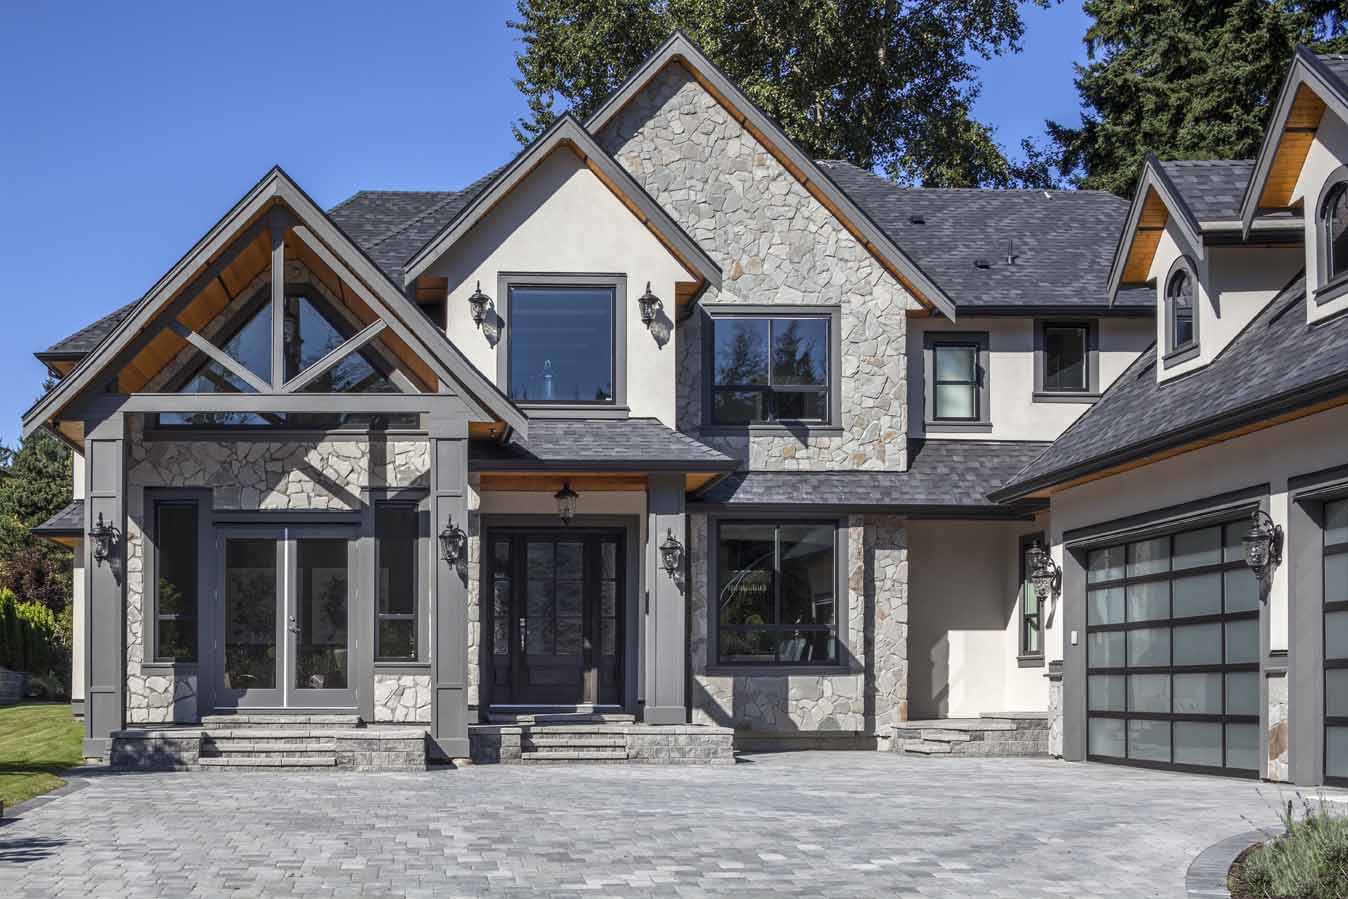 3 Superior Building Materials for Luxury Home Construction and Renovations